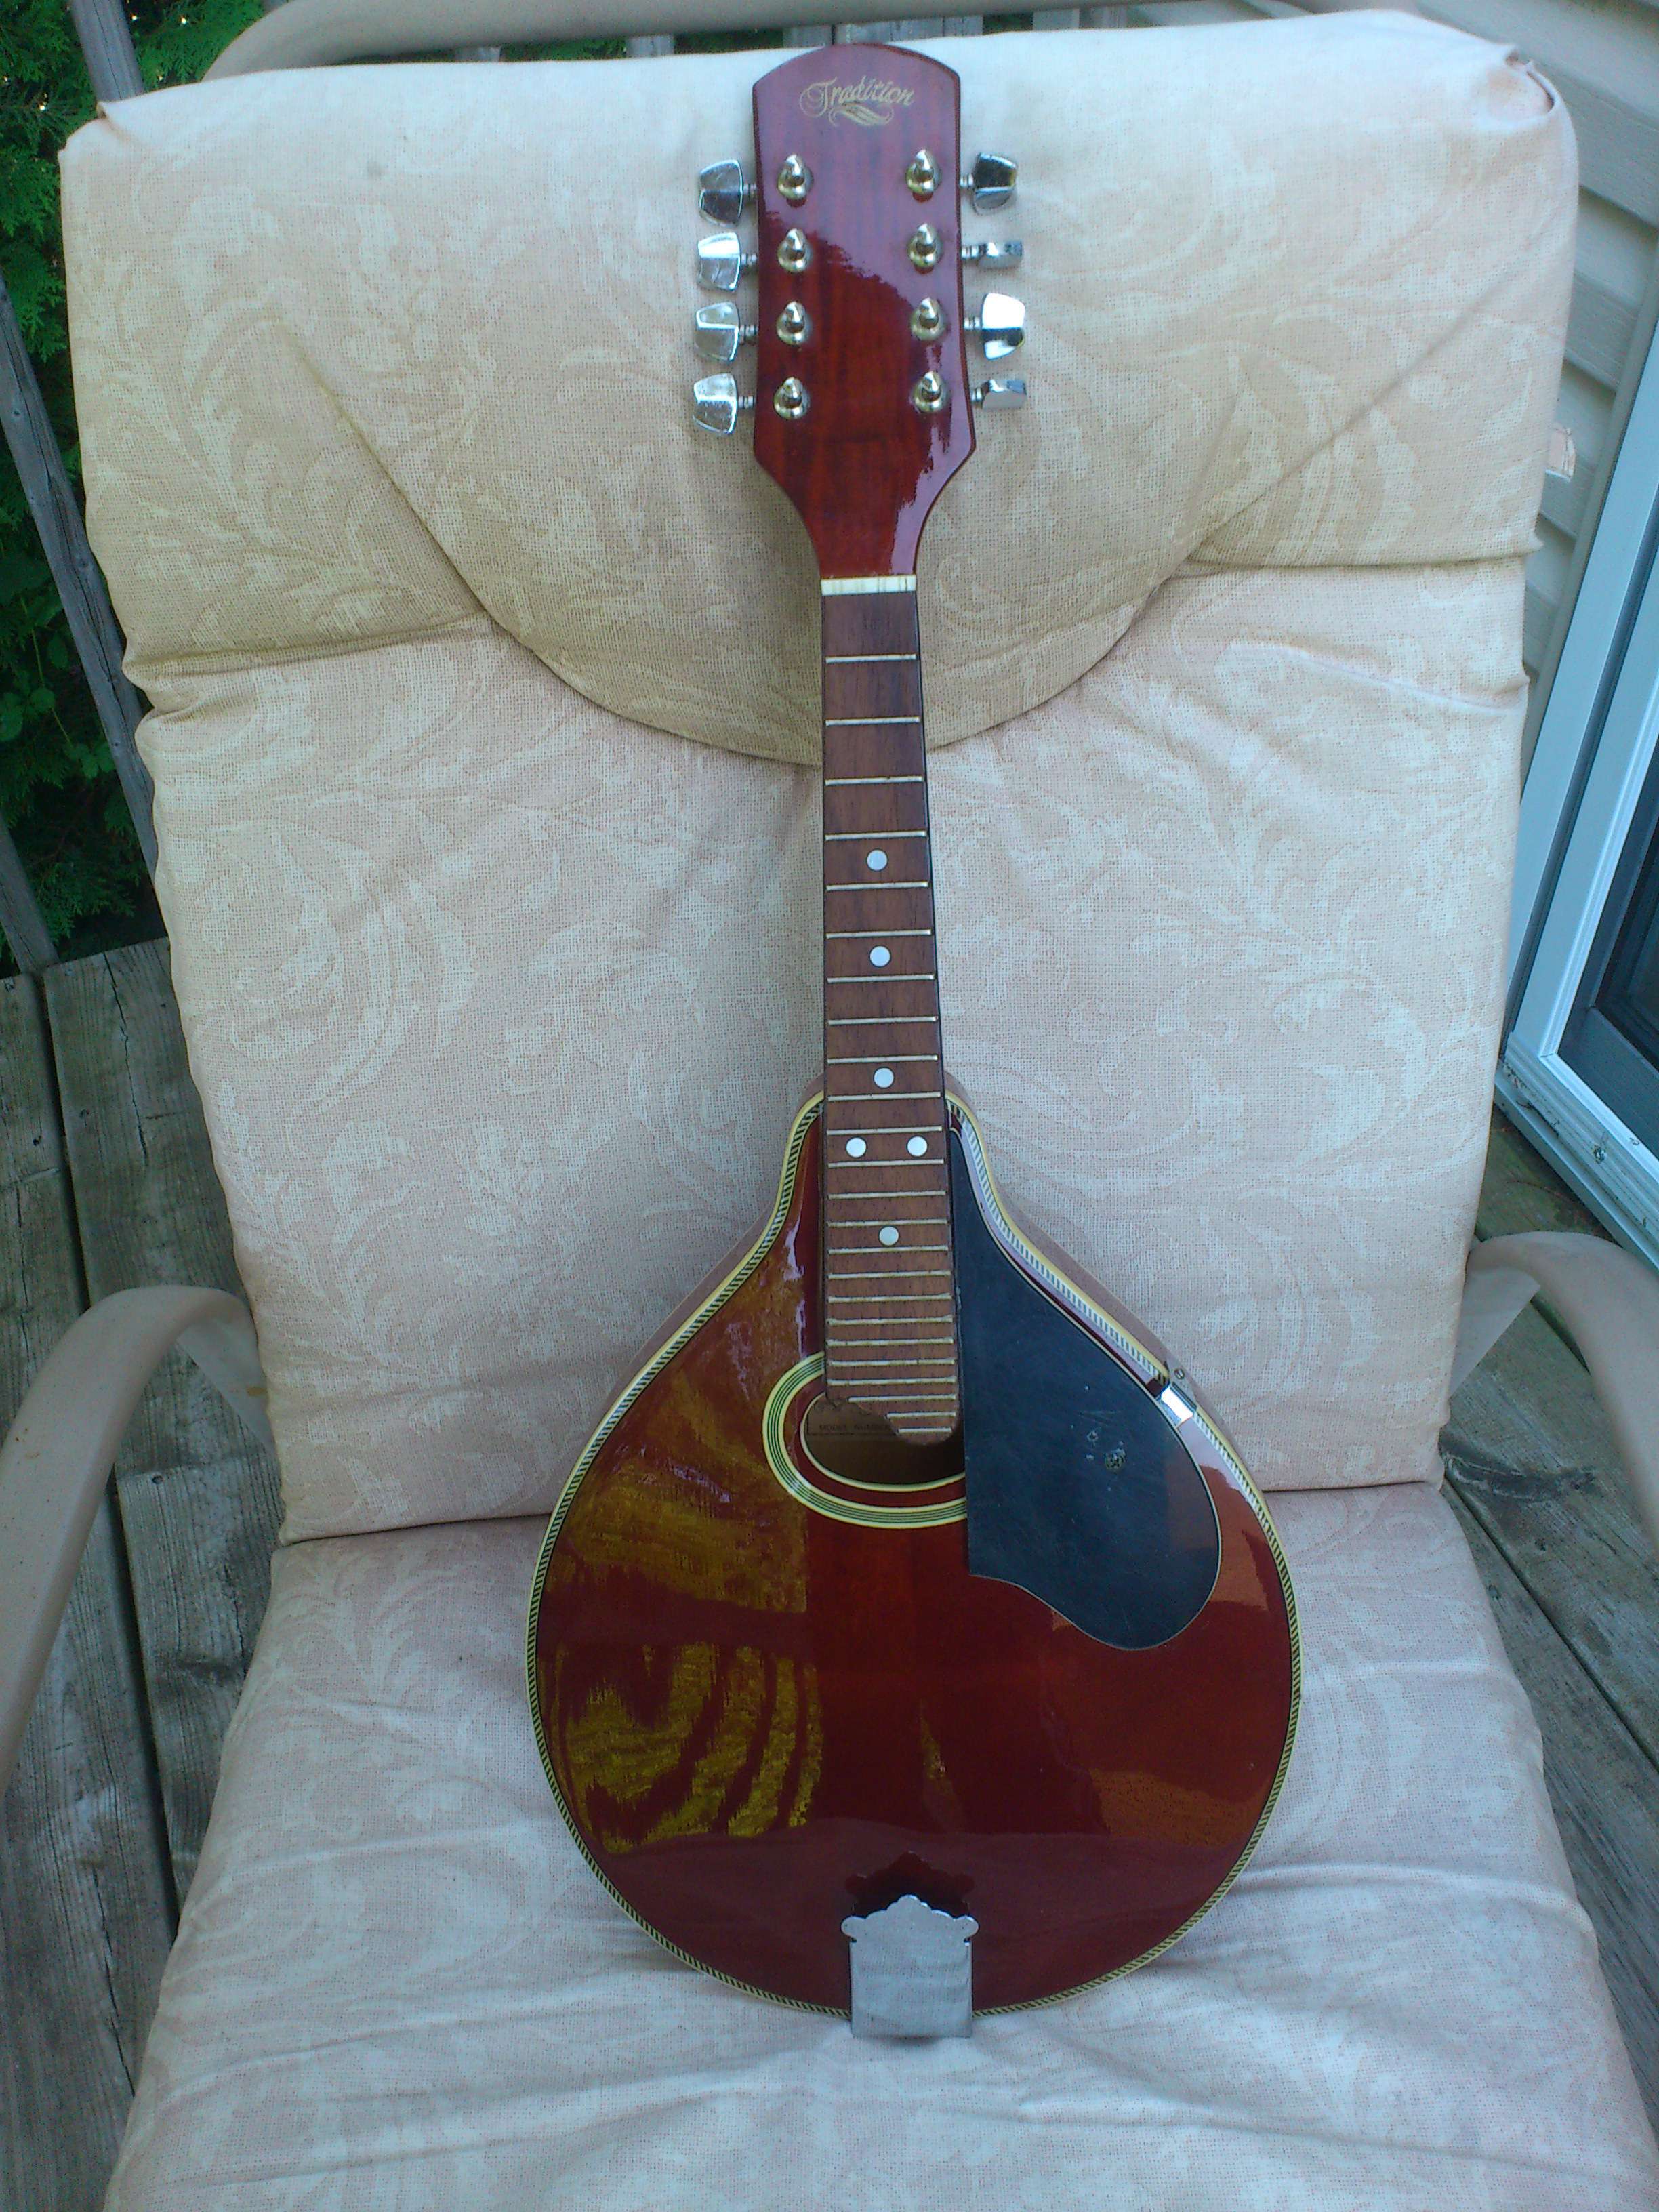 Mandolin in the woods: Miracles still may happen.